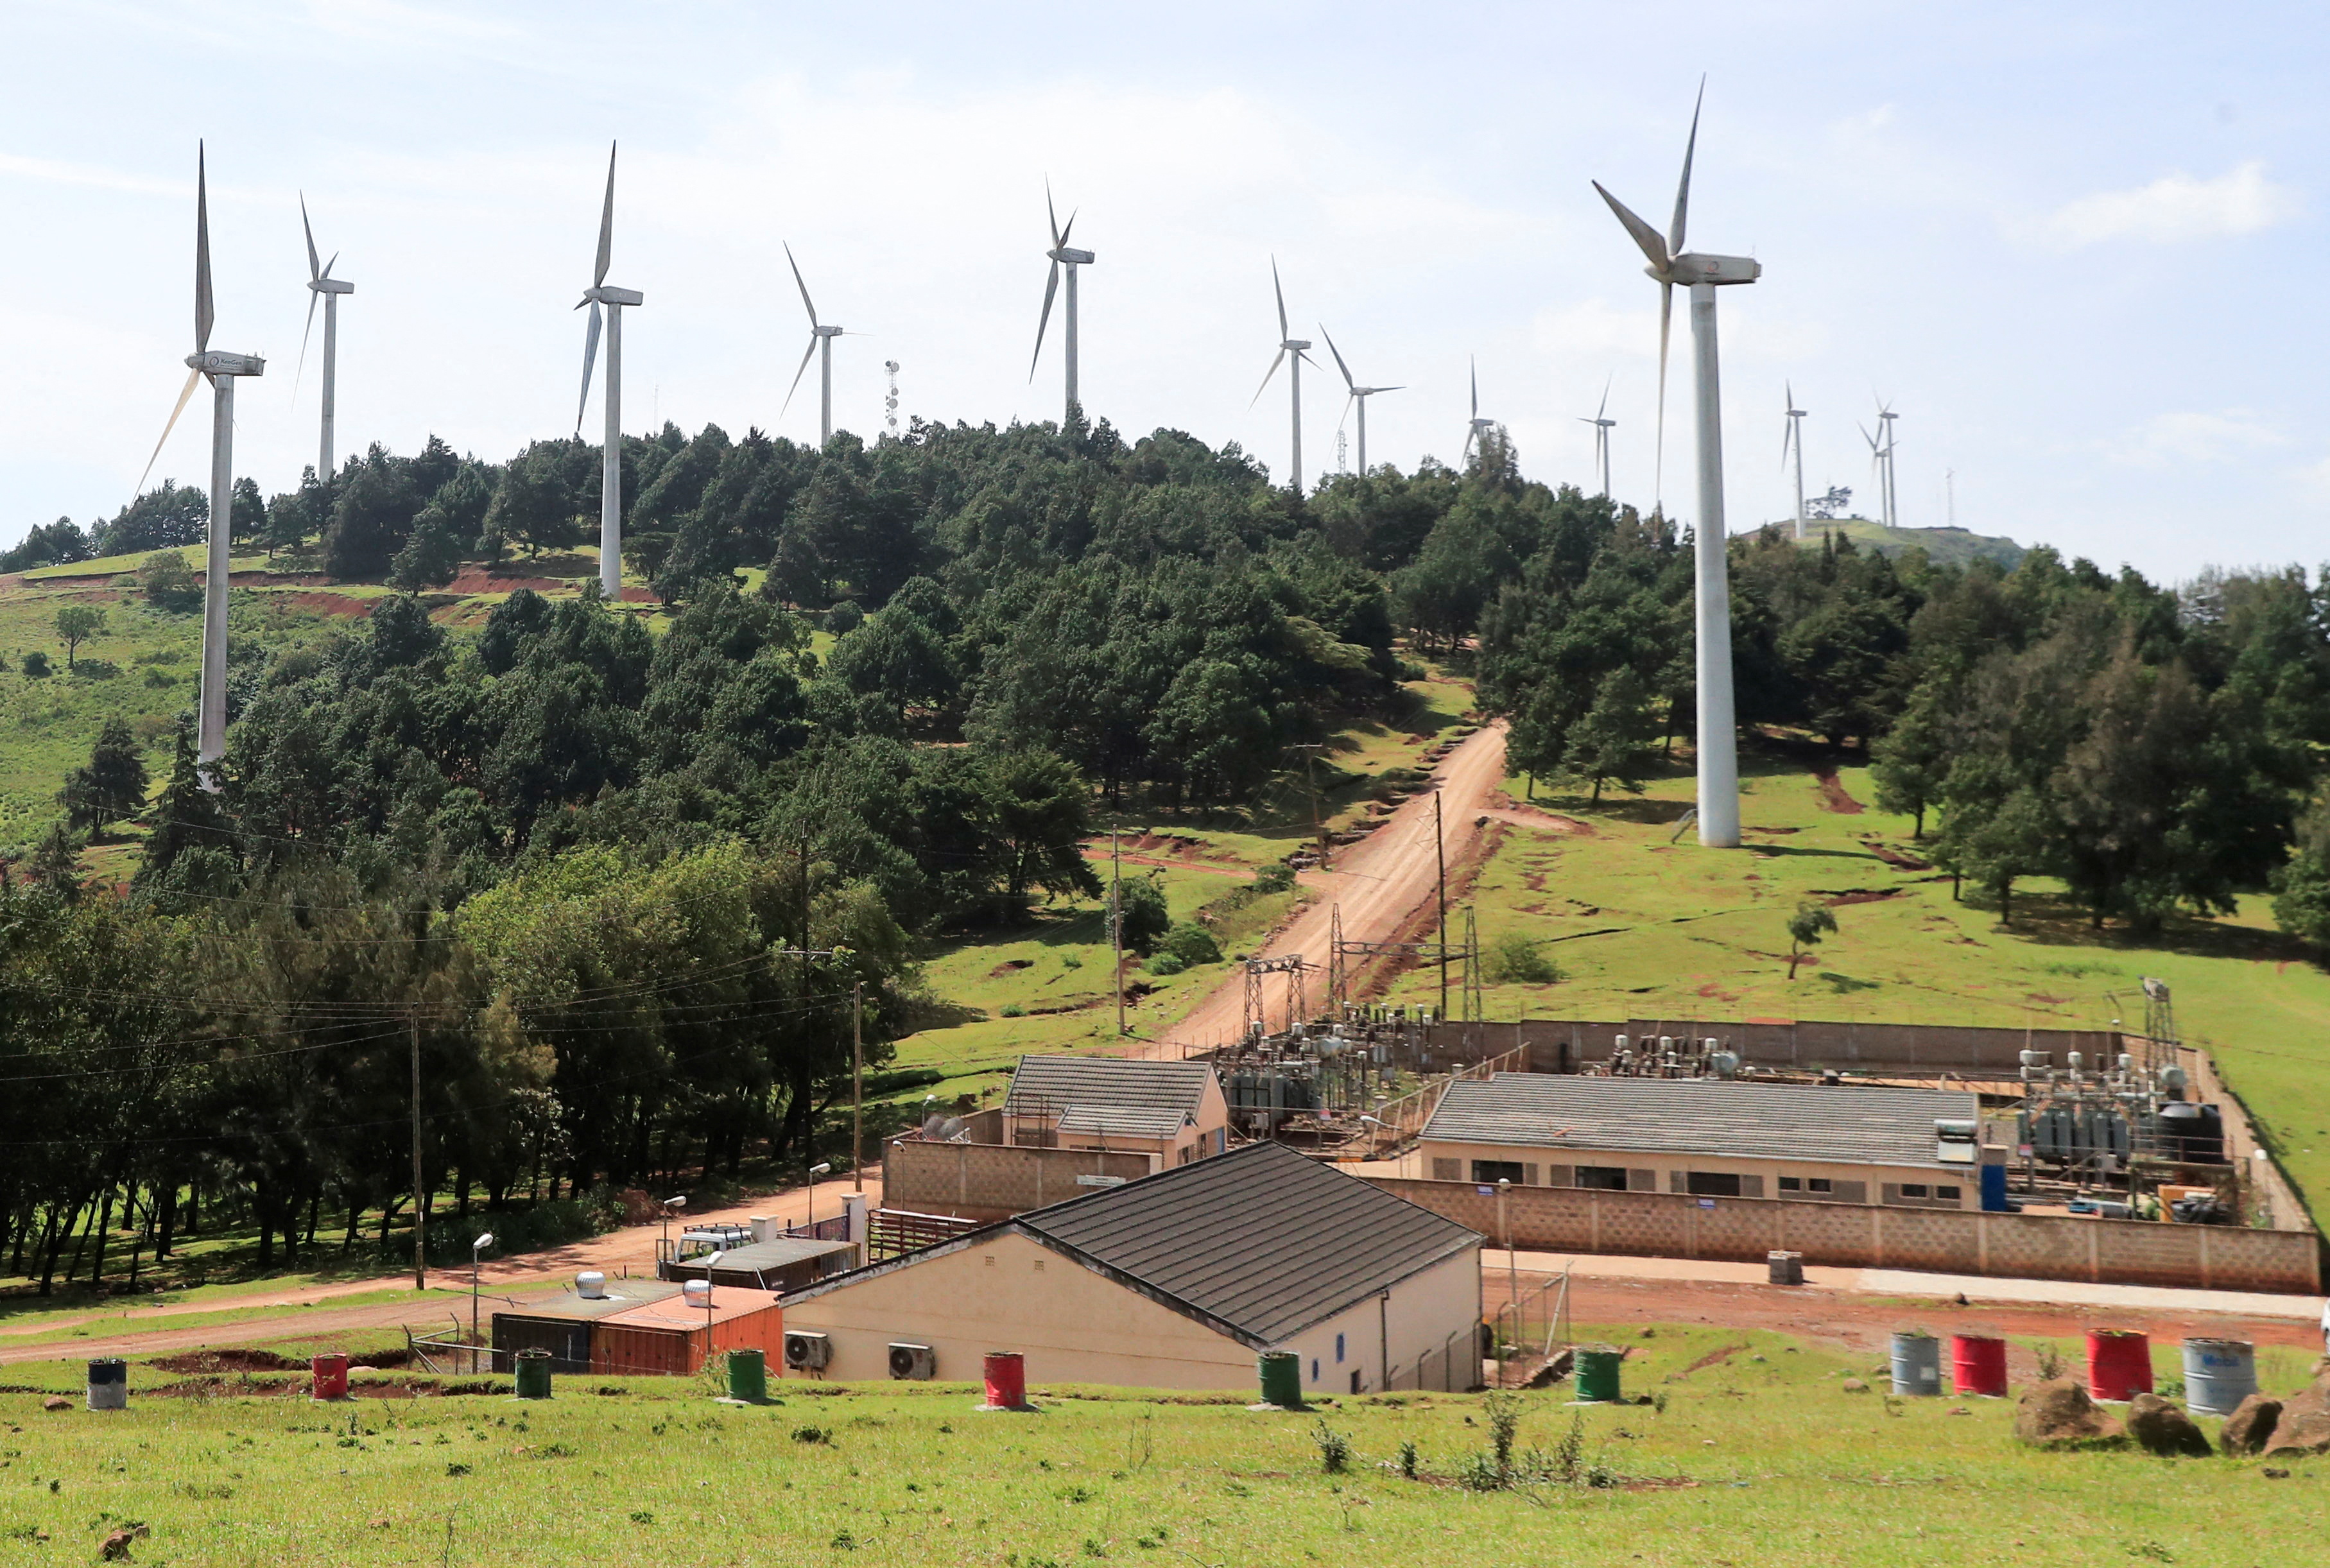 Power-generating wind turbines are seen at the KenGen station in Ngong hills